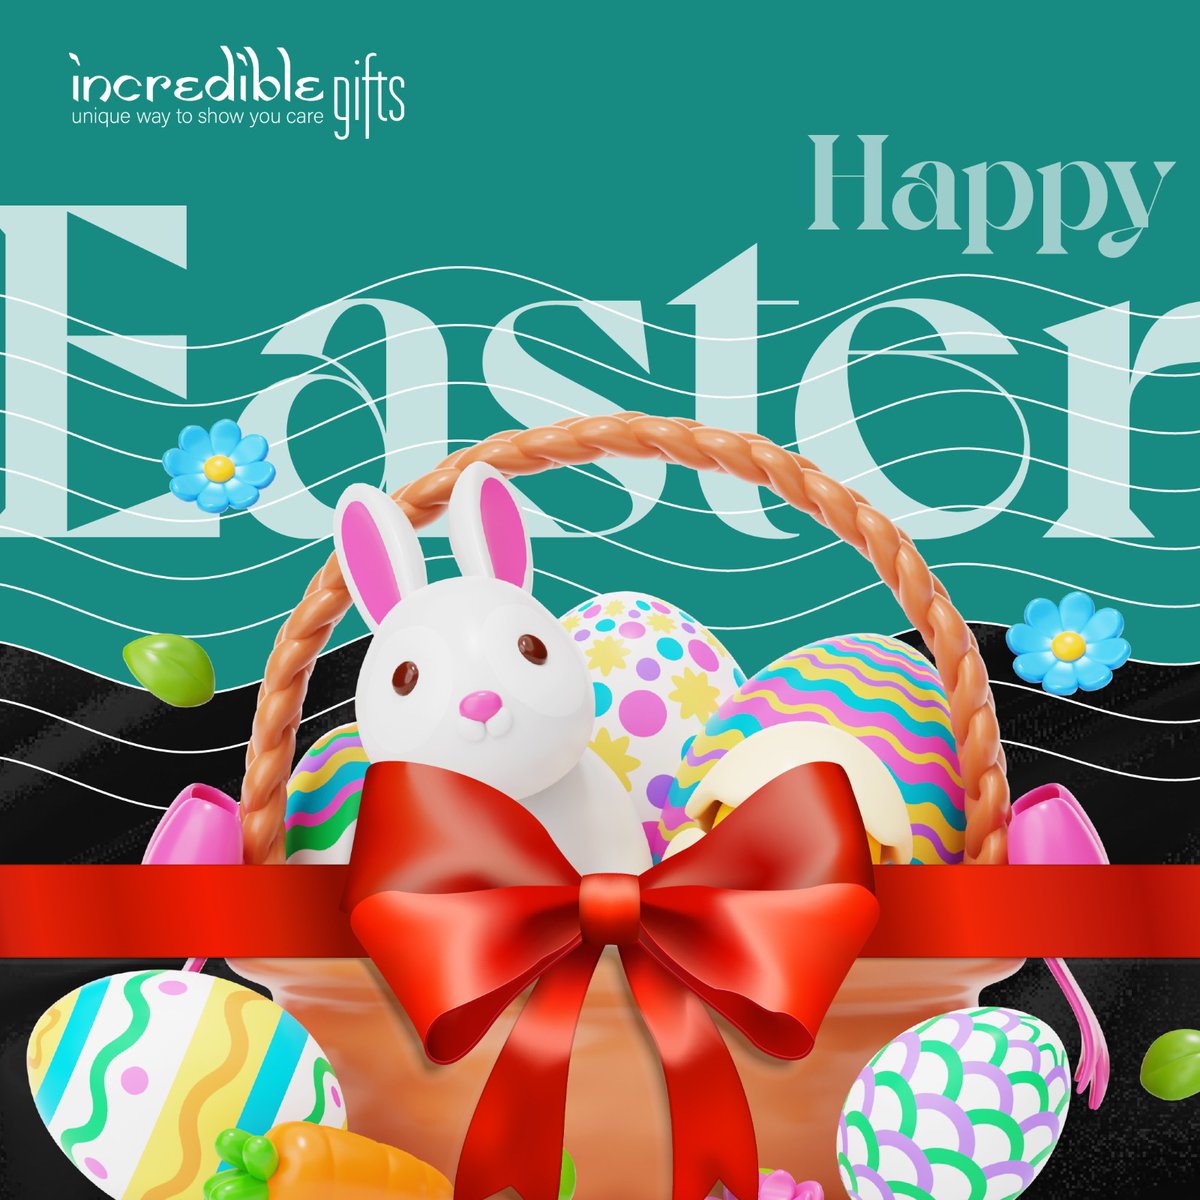 Sprinkle Easter joy throughout your home with Incredible Gifts' delightful decorations! 🐰🌸 From charming wooden ornaments to festive accents, elevate your Easter celebrations with our handpicked collection. 
#EasterDecor #IncredibleGifts #SpiritOfTheSeason #HopIntoJoy 🐰🌸🥚🎉